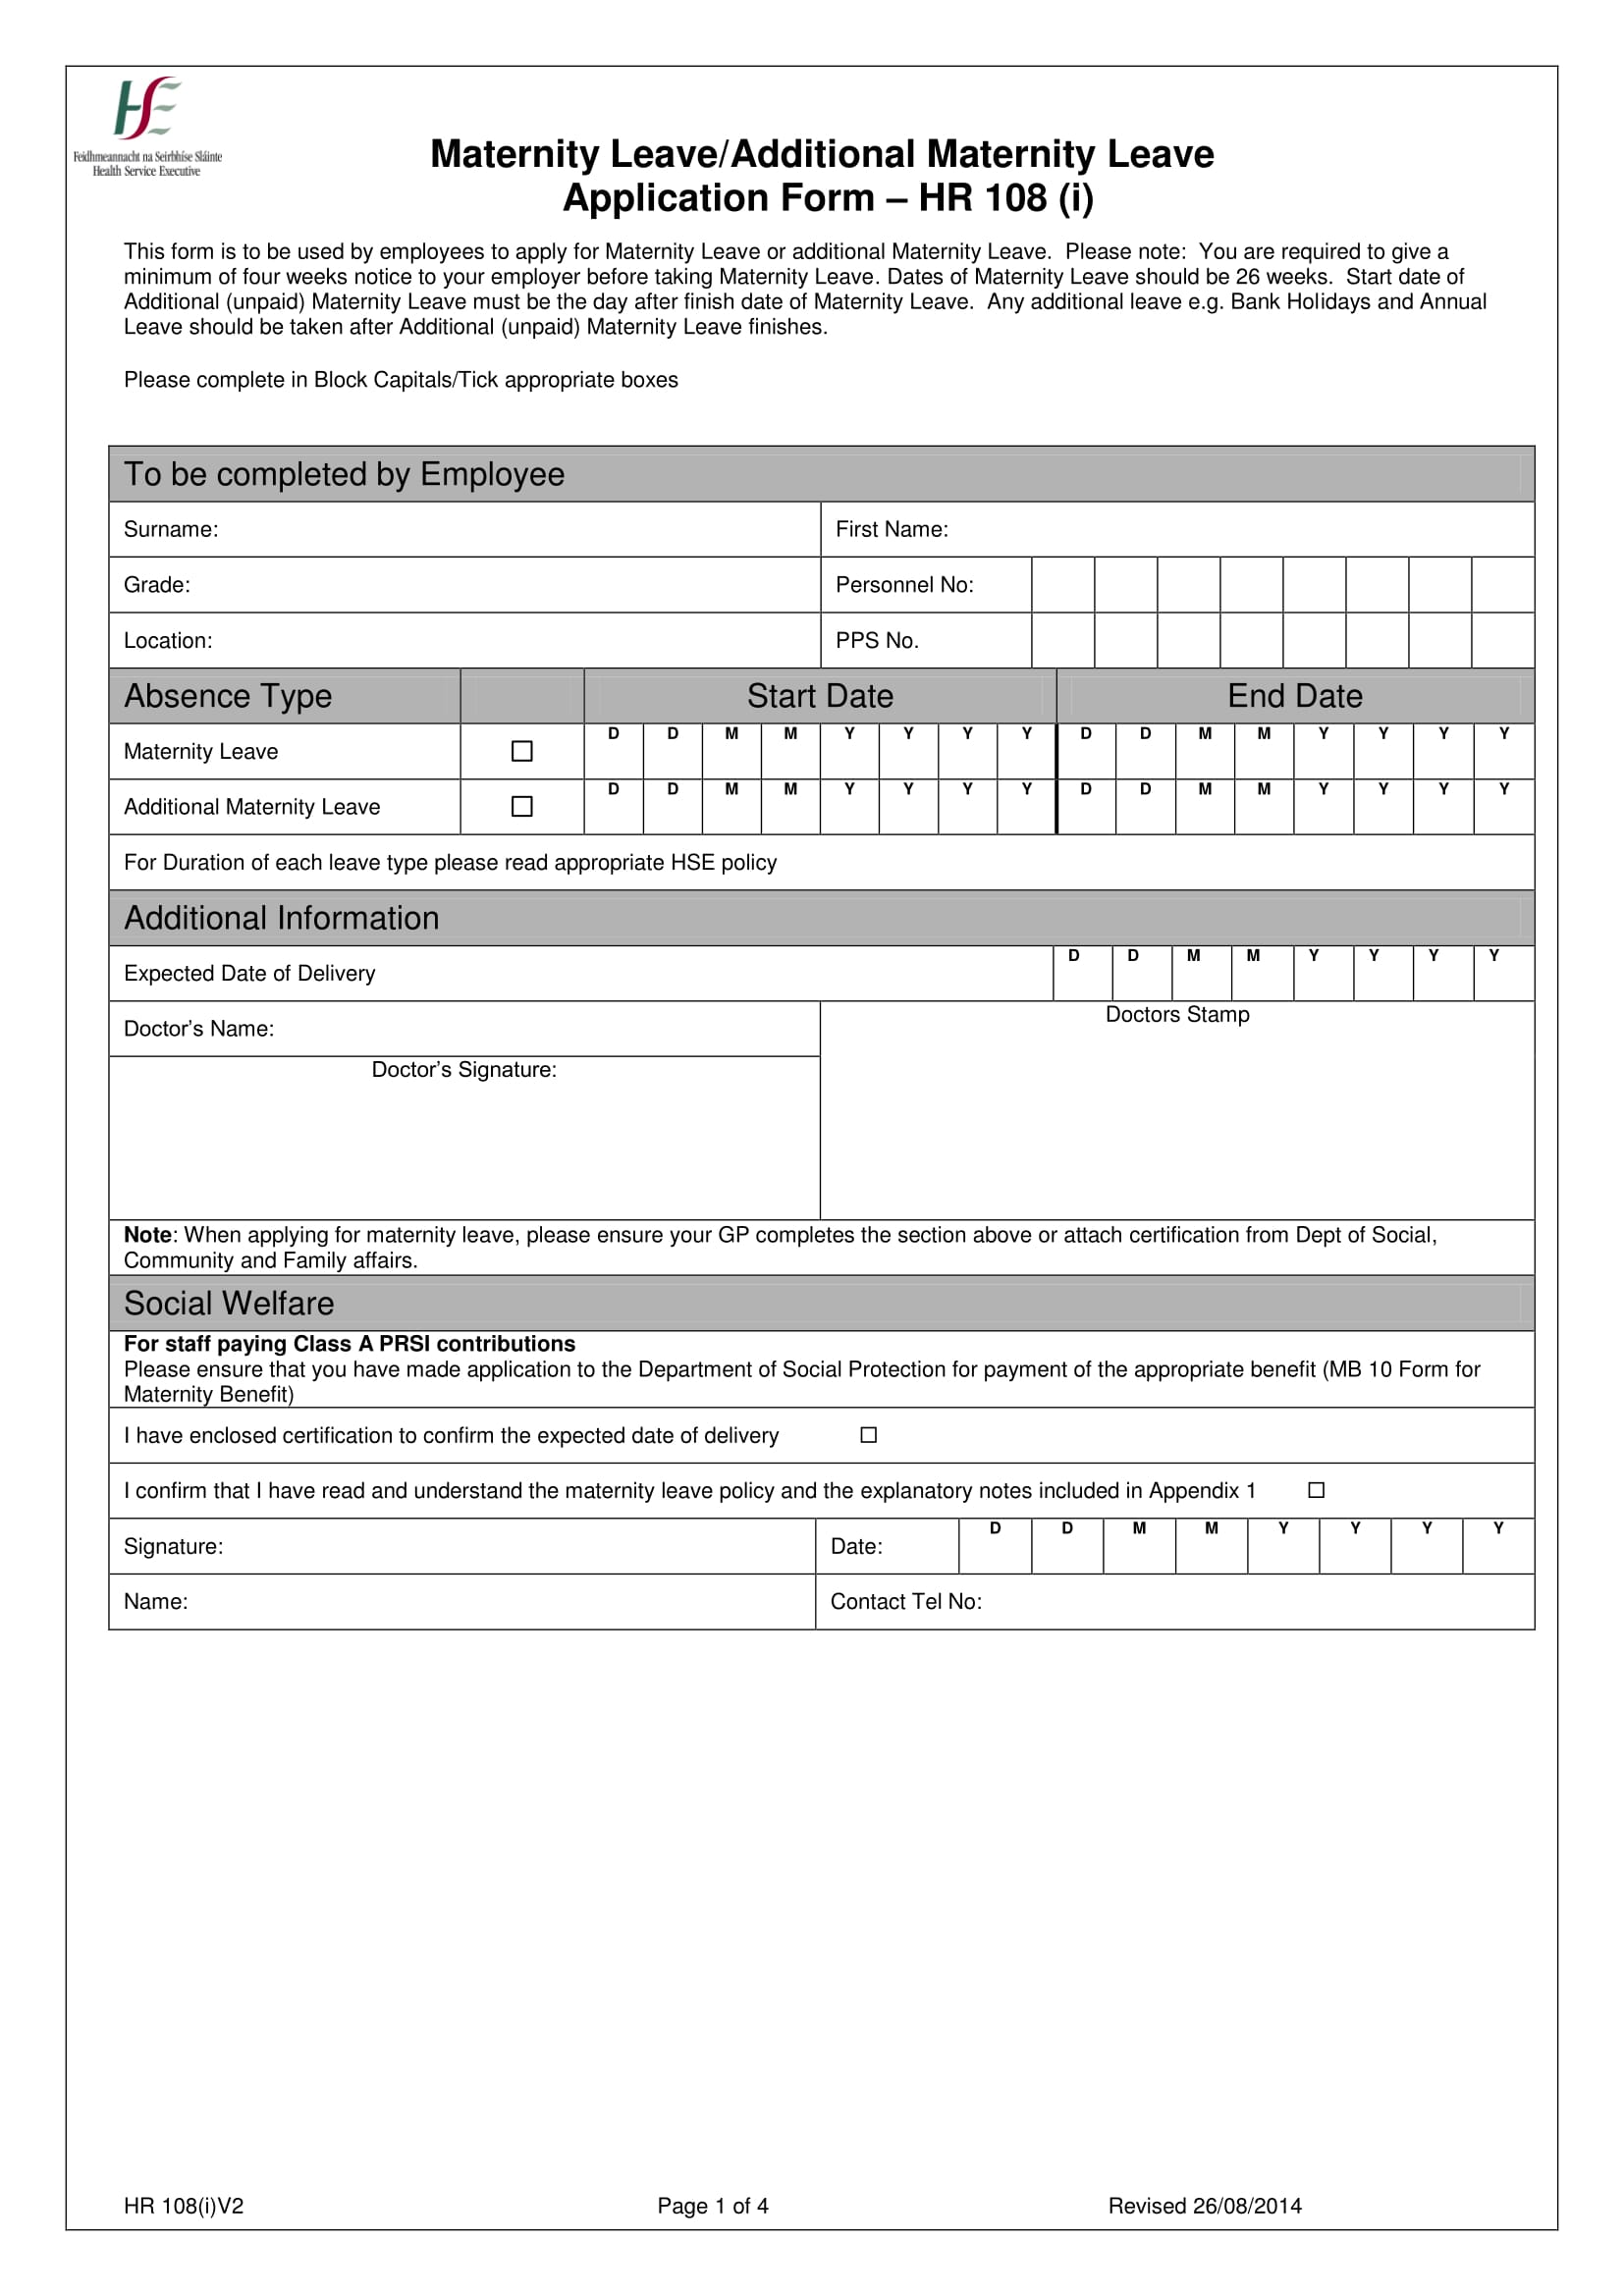 maternity leave application form 1